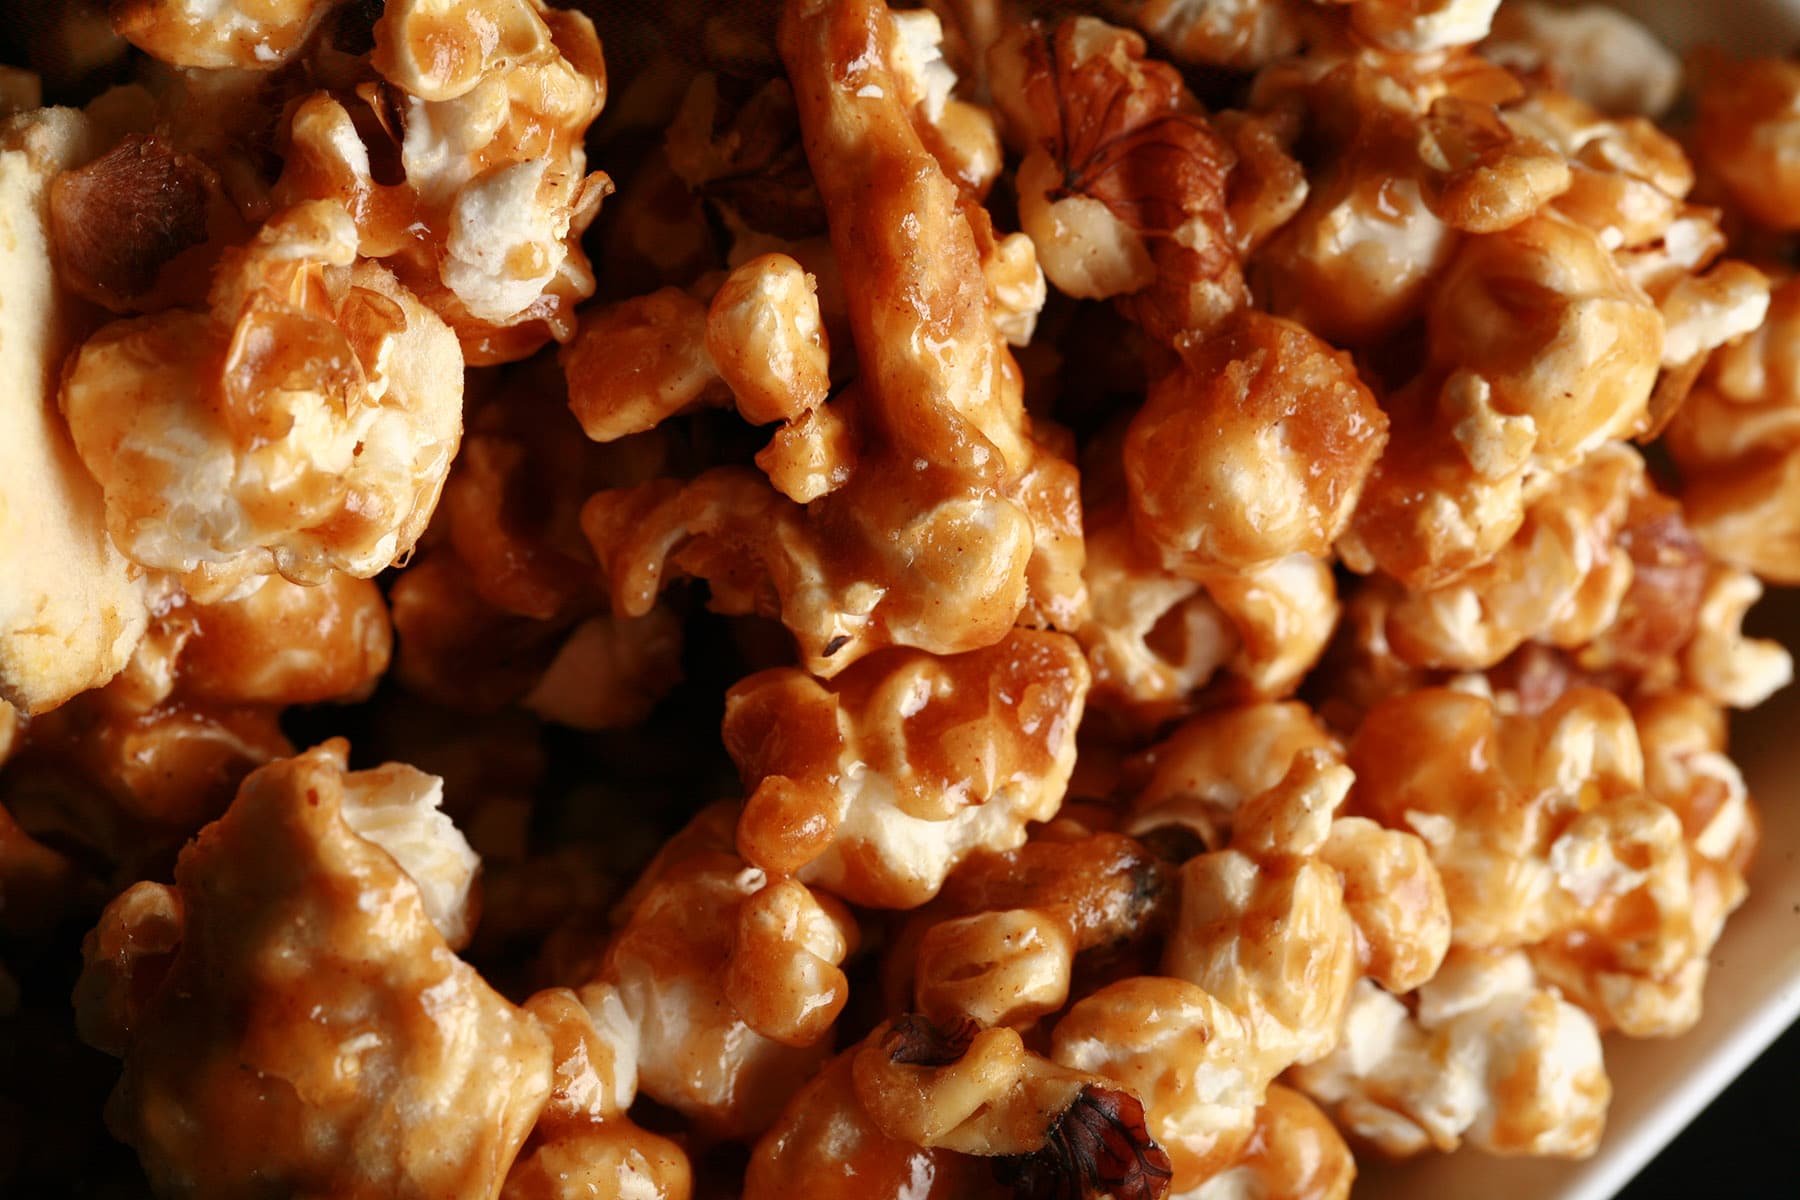 A close up view of a bowl of caramel popcorn with dried apples and cinnamon.